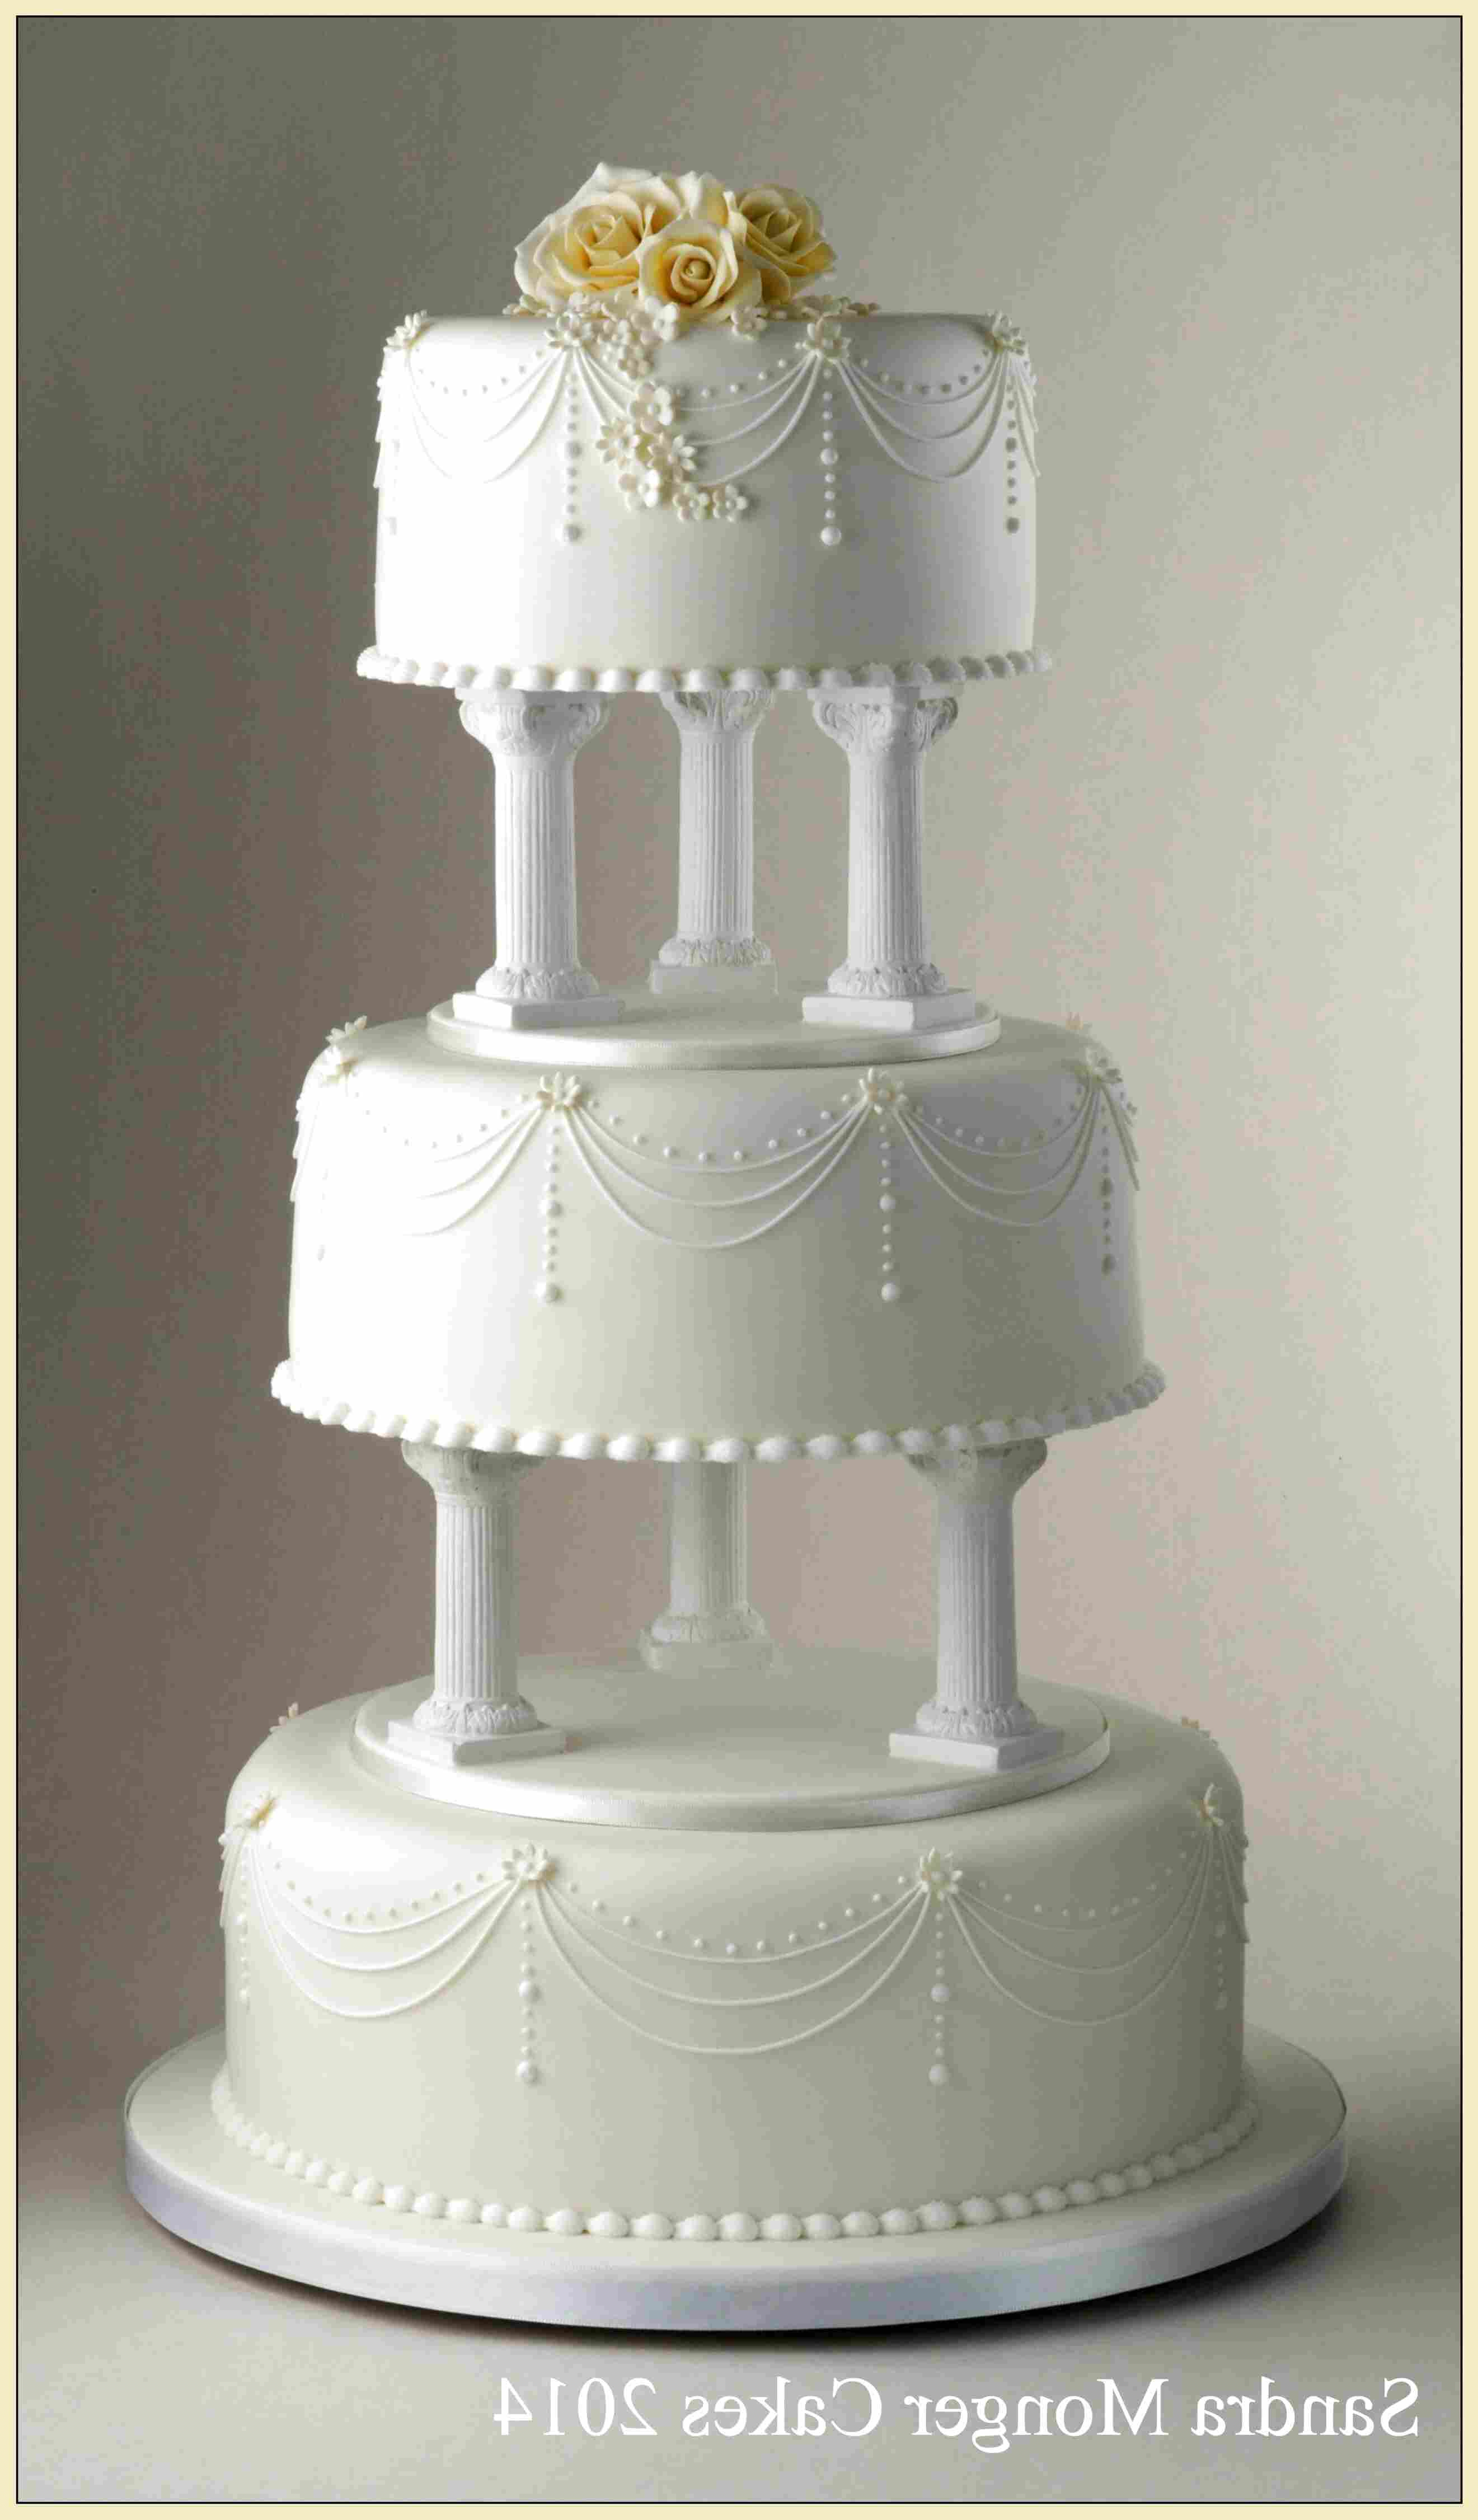 How To Tier A Wedding Cake With Pillars Rodriguez Viey